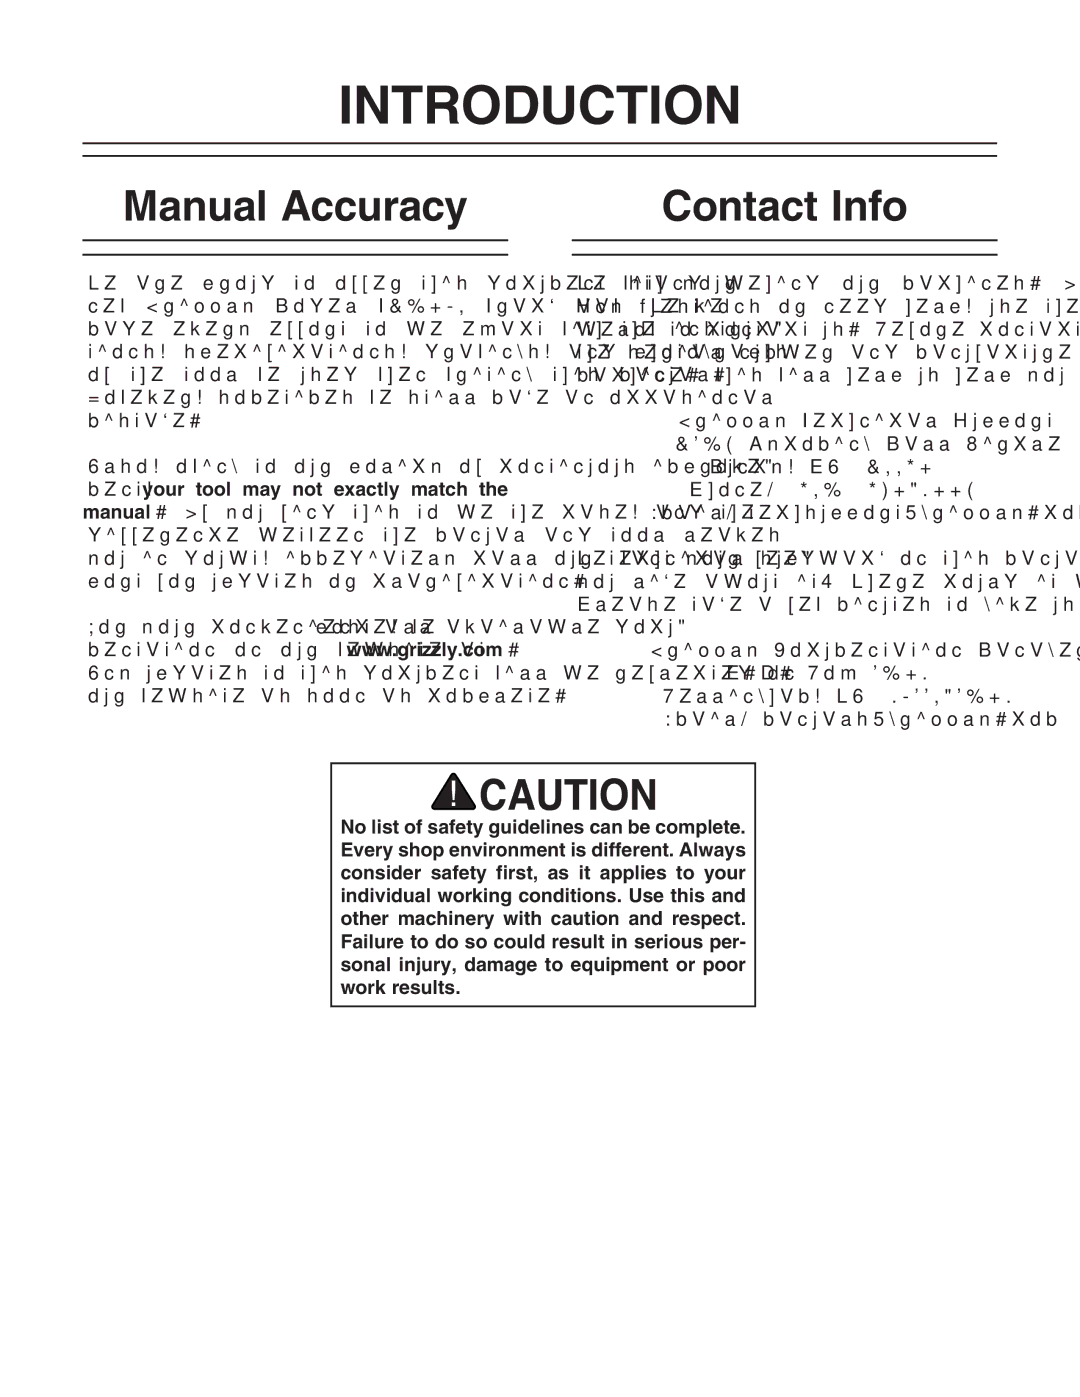 Grizzly T10687 owner manual Introduction, Manual Accuracy, Contact Info, Gooan9dXjbZciVidcBVcV\Zg #D#7dm%+ 